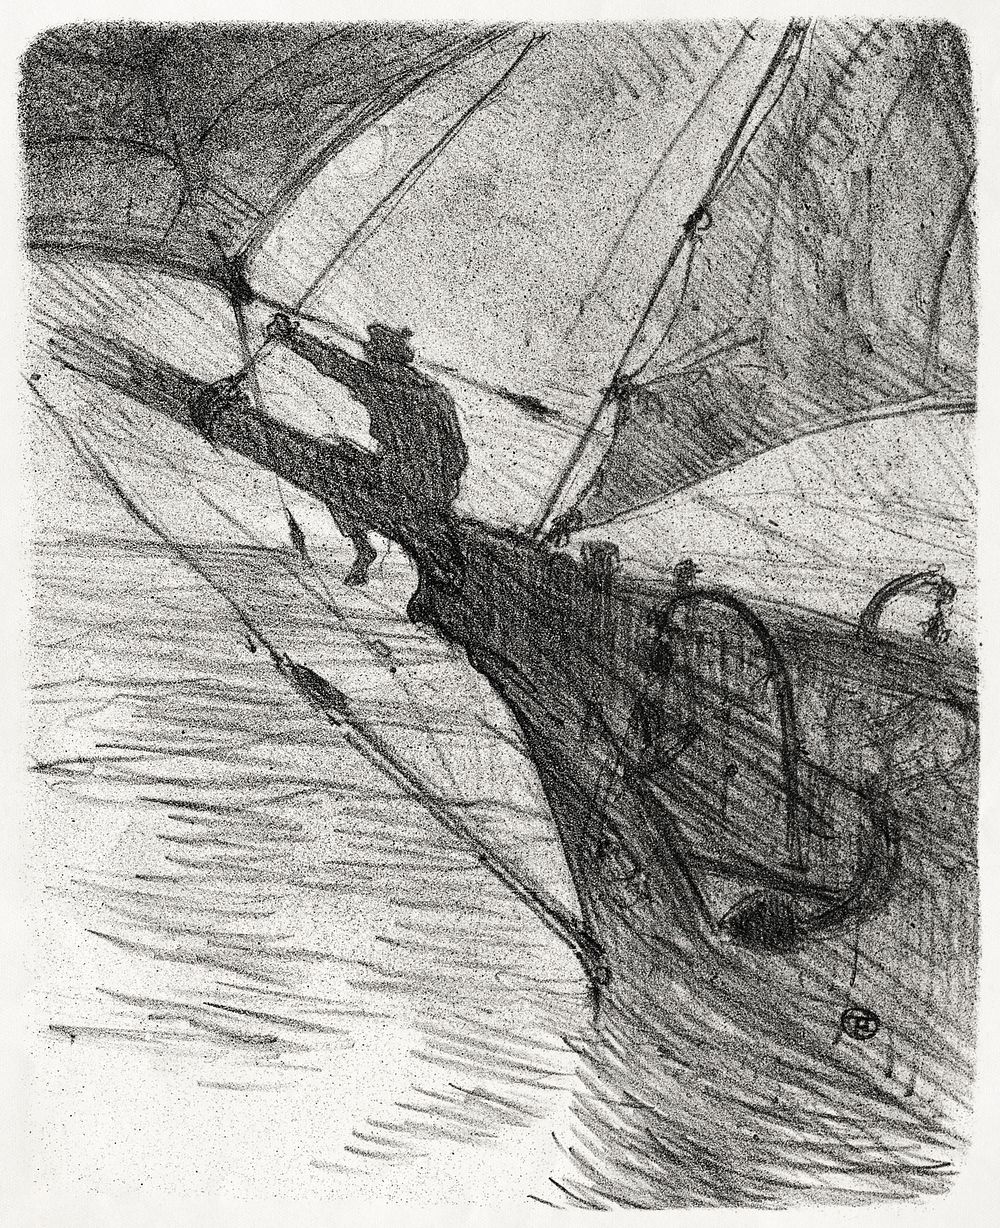 Oceano Nox (1895) print in high resolution by Henri de Toulouse&ndash;Lautrec. Original from The Cleveland Museum of Art.…